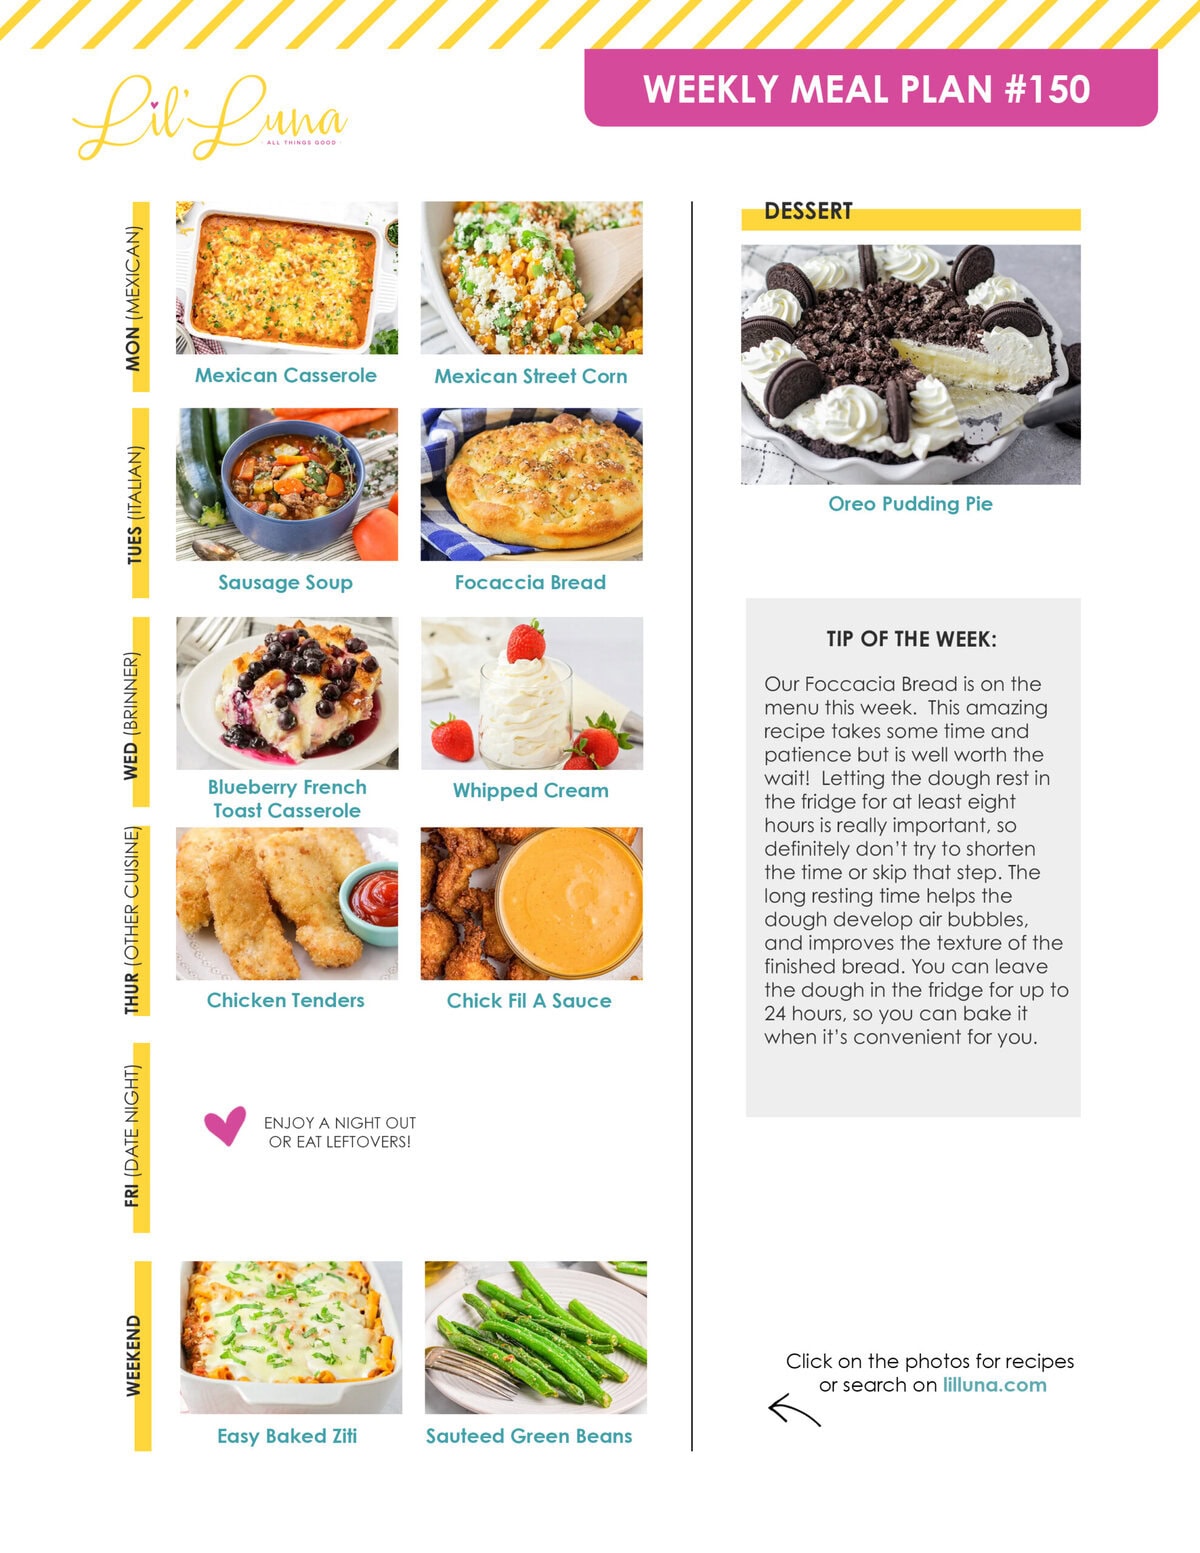 Meal plan 150 graphic.